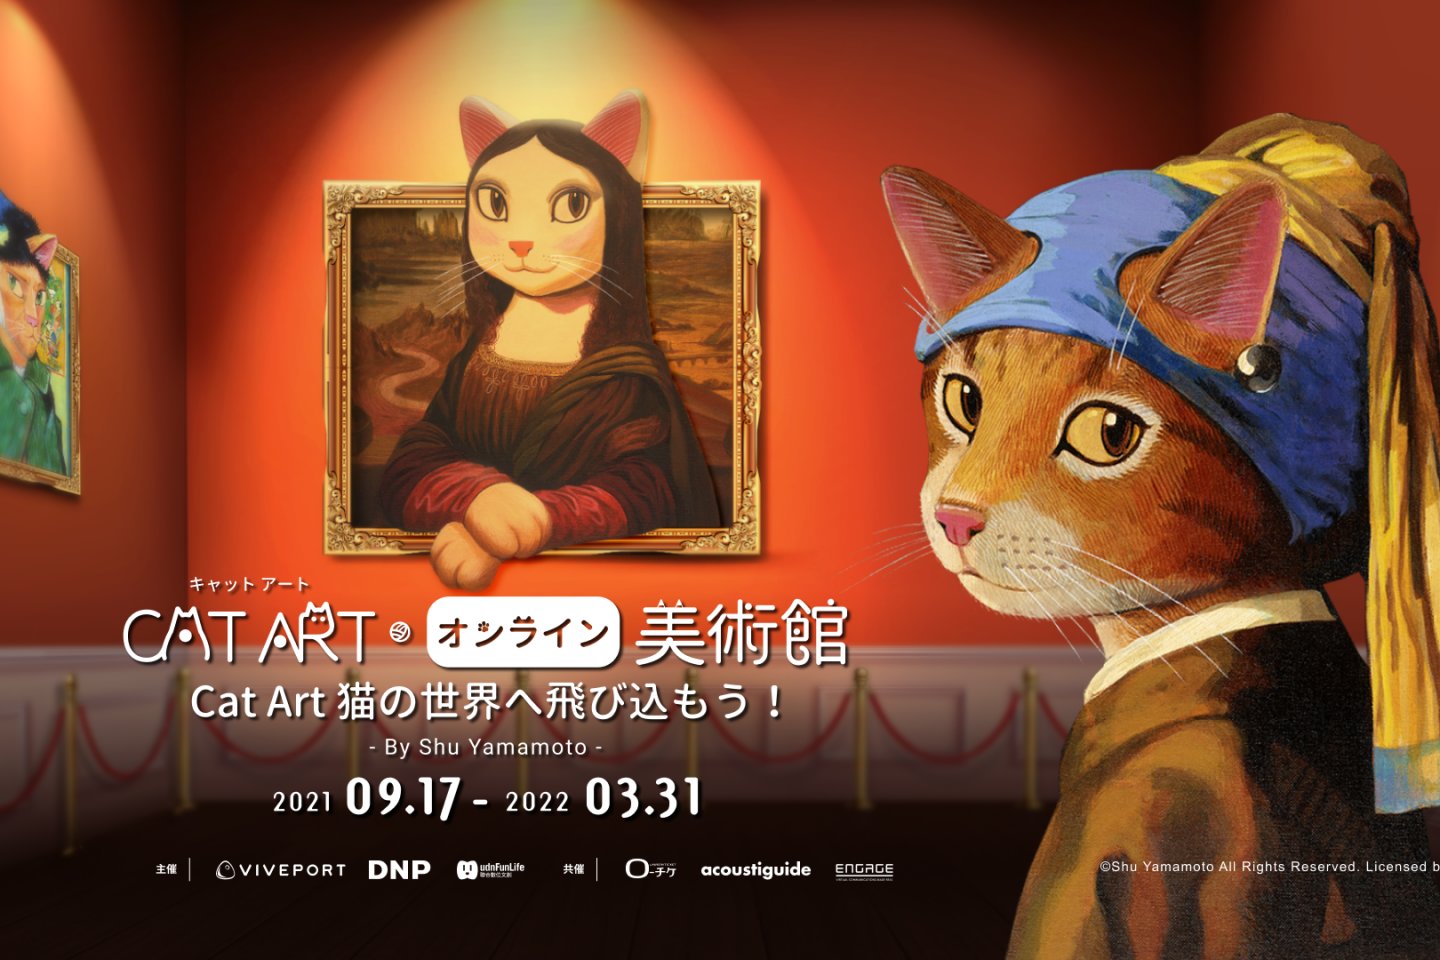 Cat replicas of the Mona Lisa and Girl with a Pearl Earring will be displayed